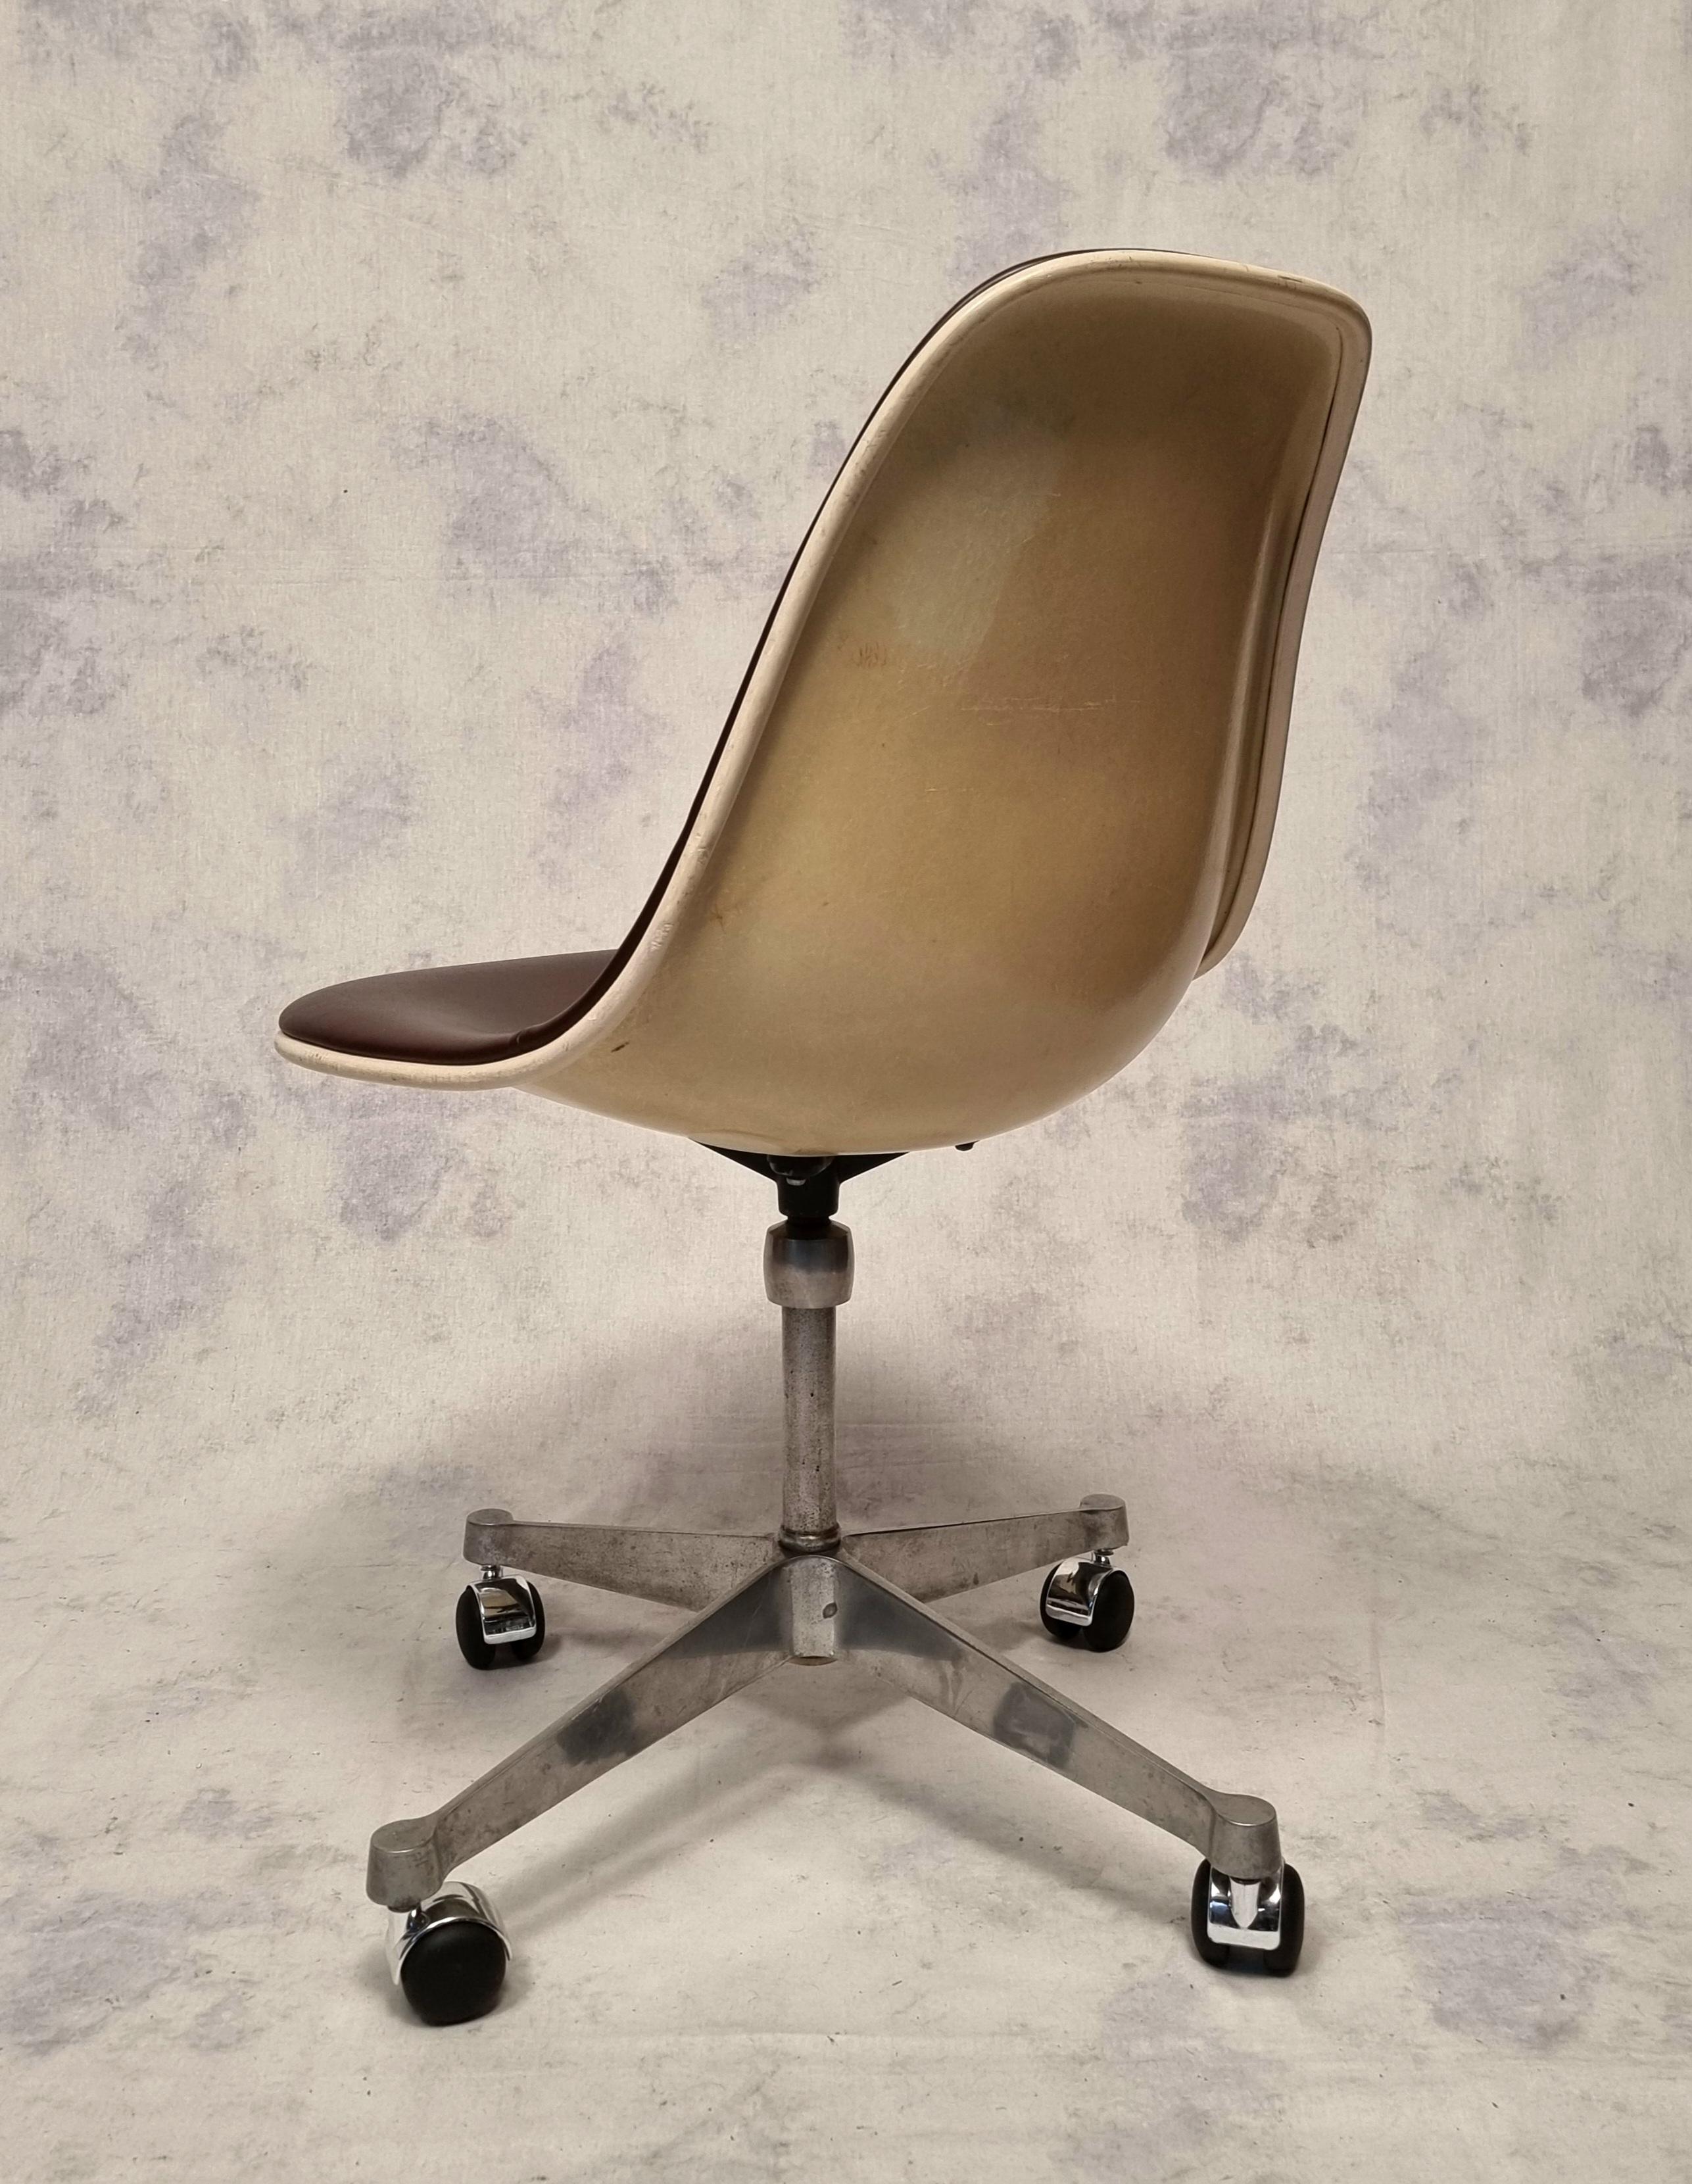 Industrial Office Chair By Charles And Ray Eames For Herman Miller - Fiberglass - Ca 1960 For Sale